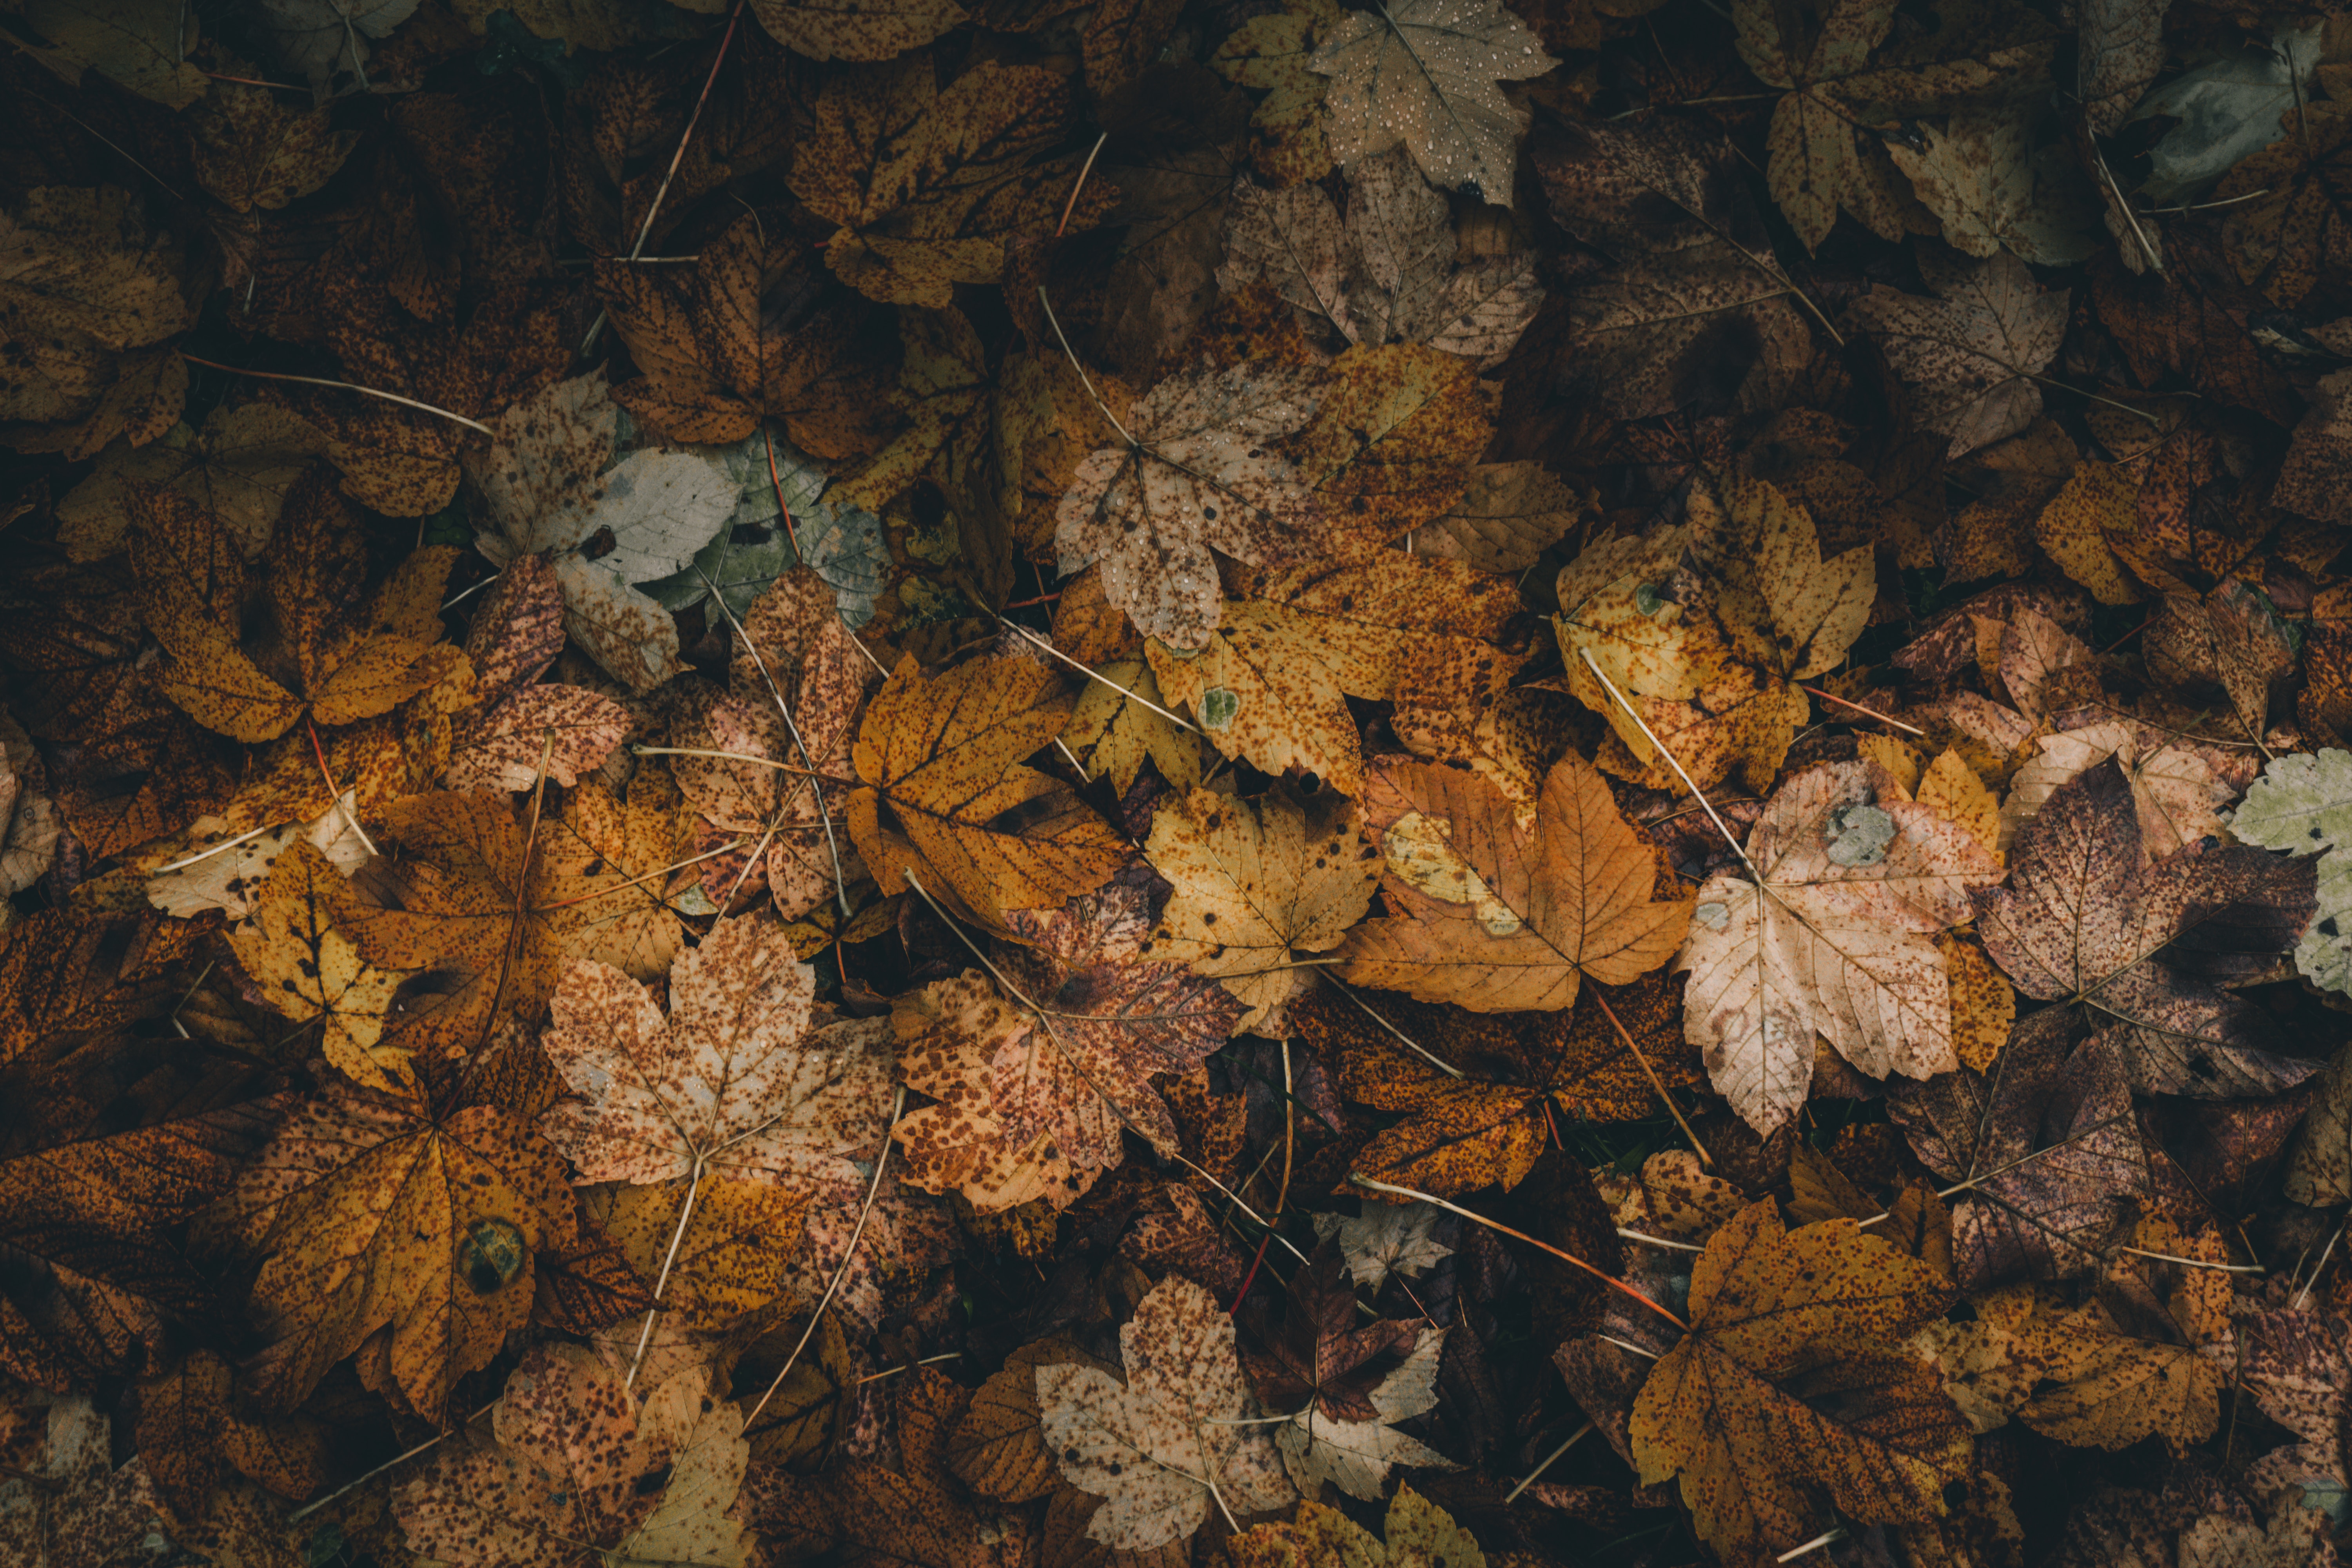 62460 Screensavers and Wallpapers Fallen for phone. Download nature, autumn, leaves, foliage, dry, fallen pictures for free